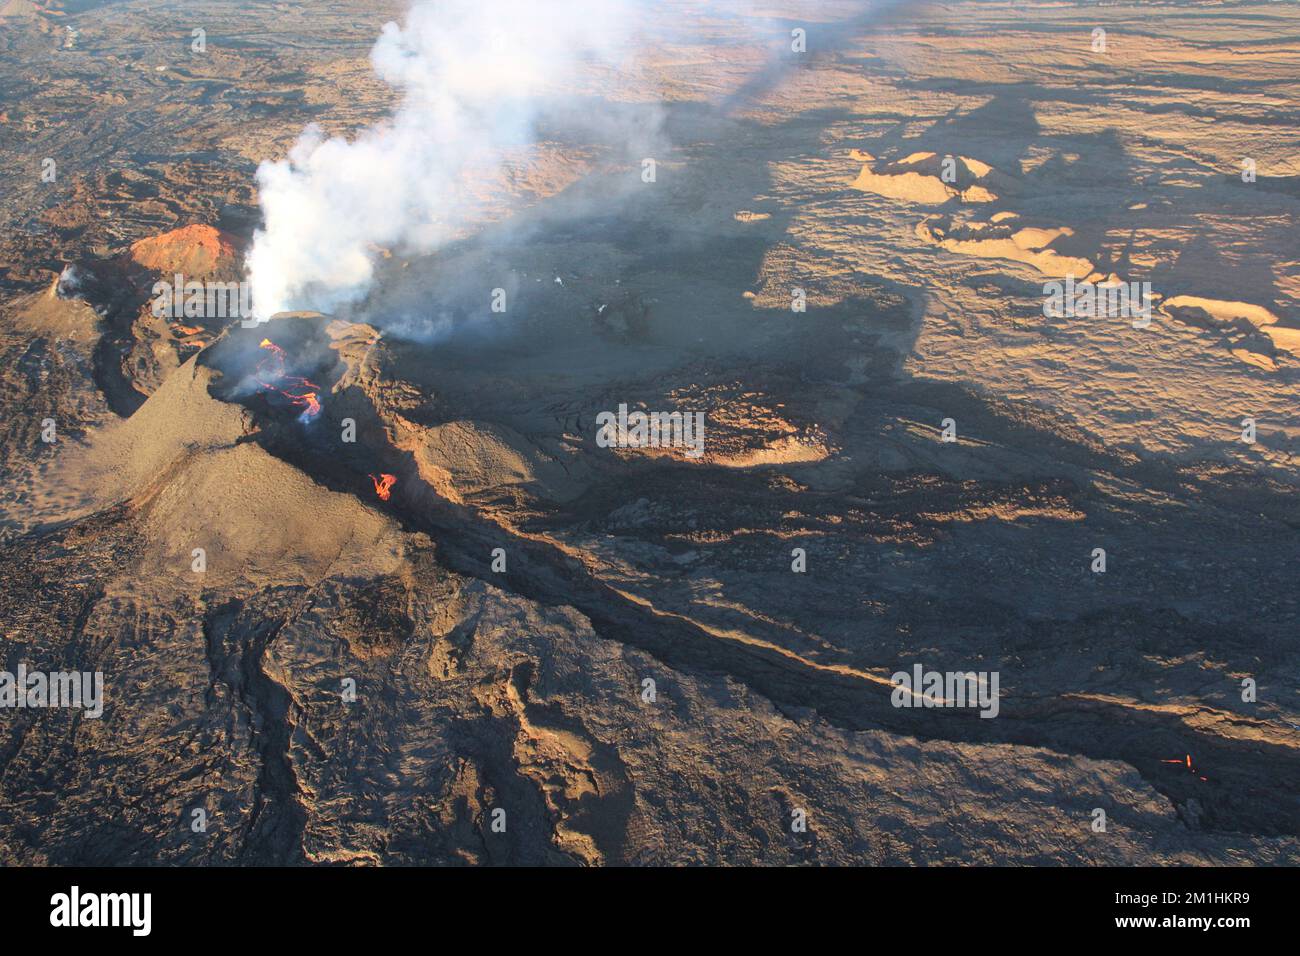 Mauna Loa, Hawaii, USA. 10th Dec, 2022. Aerial image of fissure 3 erupting on the Northeast Rift Zone of Mauna Loa. As of 7:00 a.m. today, December 10, a lava pond replaced the fountains at the fissure 3 vent. USGS image by J. Bard. Credit: USGS/ZUMA Wire/ZUMAPRESS.com/Alamy Live News Stock Photo